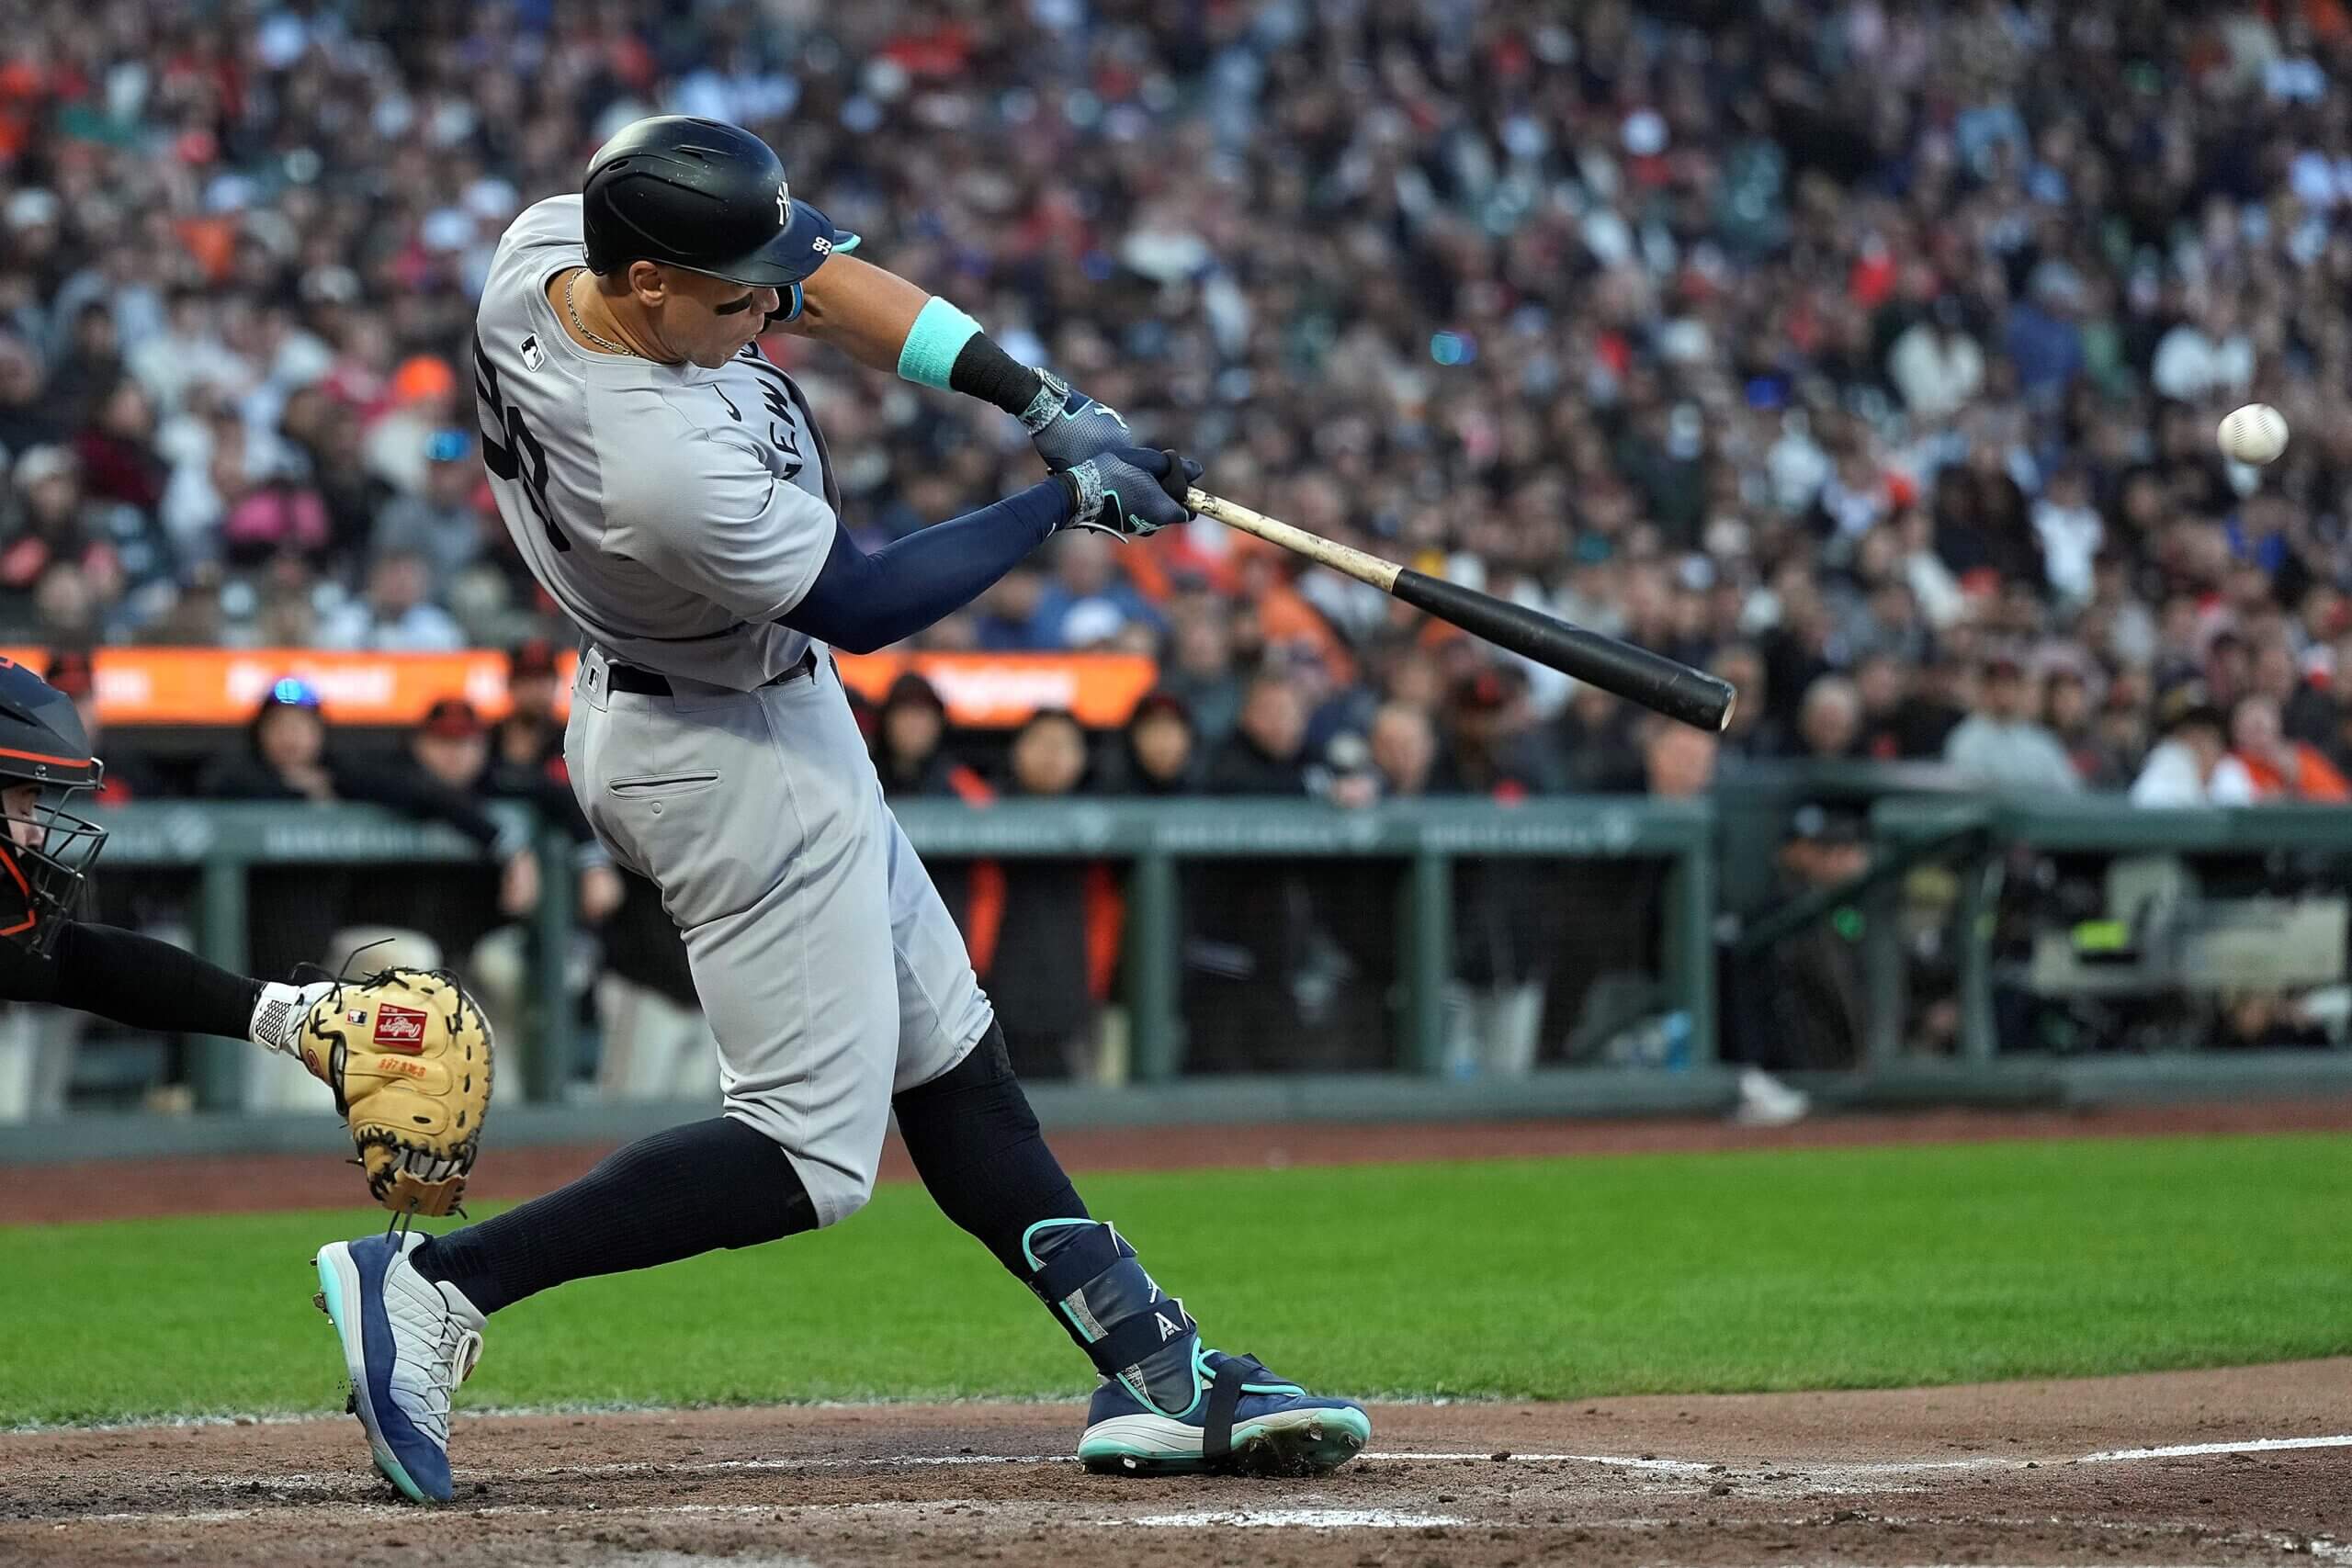 Aaron Judge hits 2 home runs in San Francisco debut as Yankees torch Giants